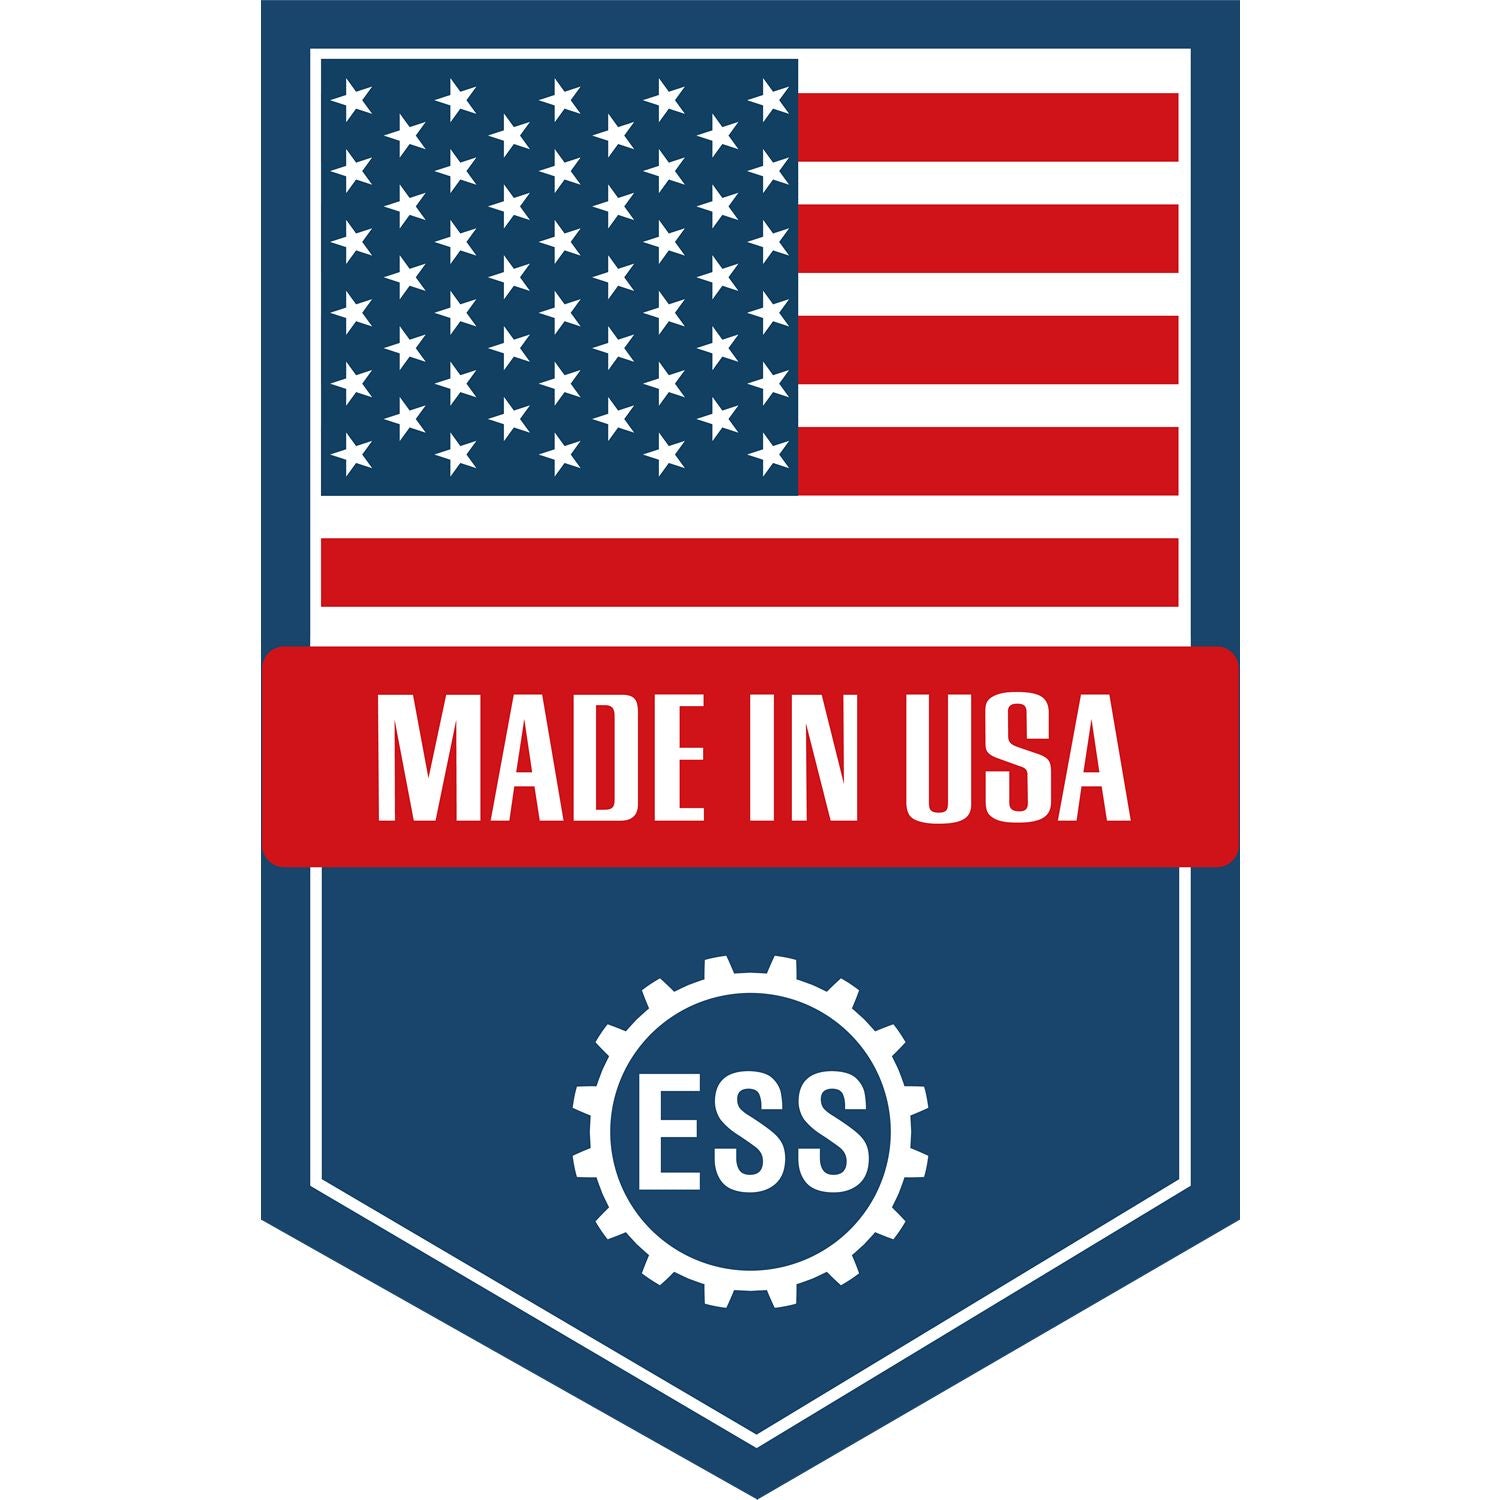 An icon or graphic with an american flag and text reading Made in USA for the State of Tennessee Handheld Landscape Architect Seal